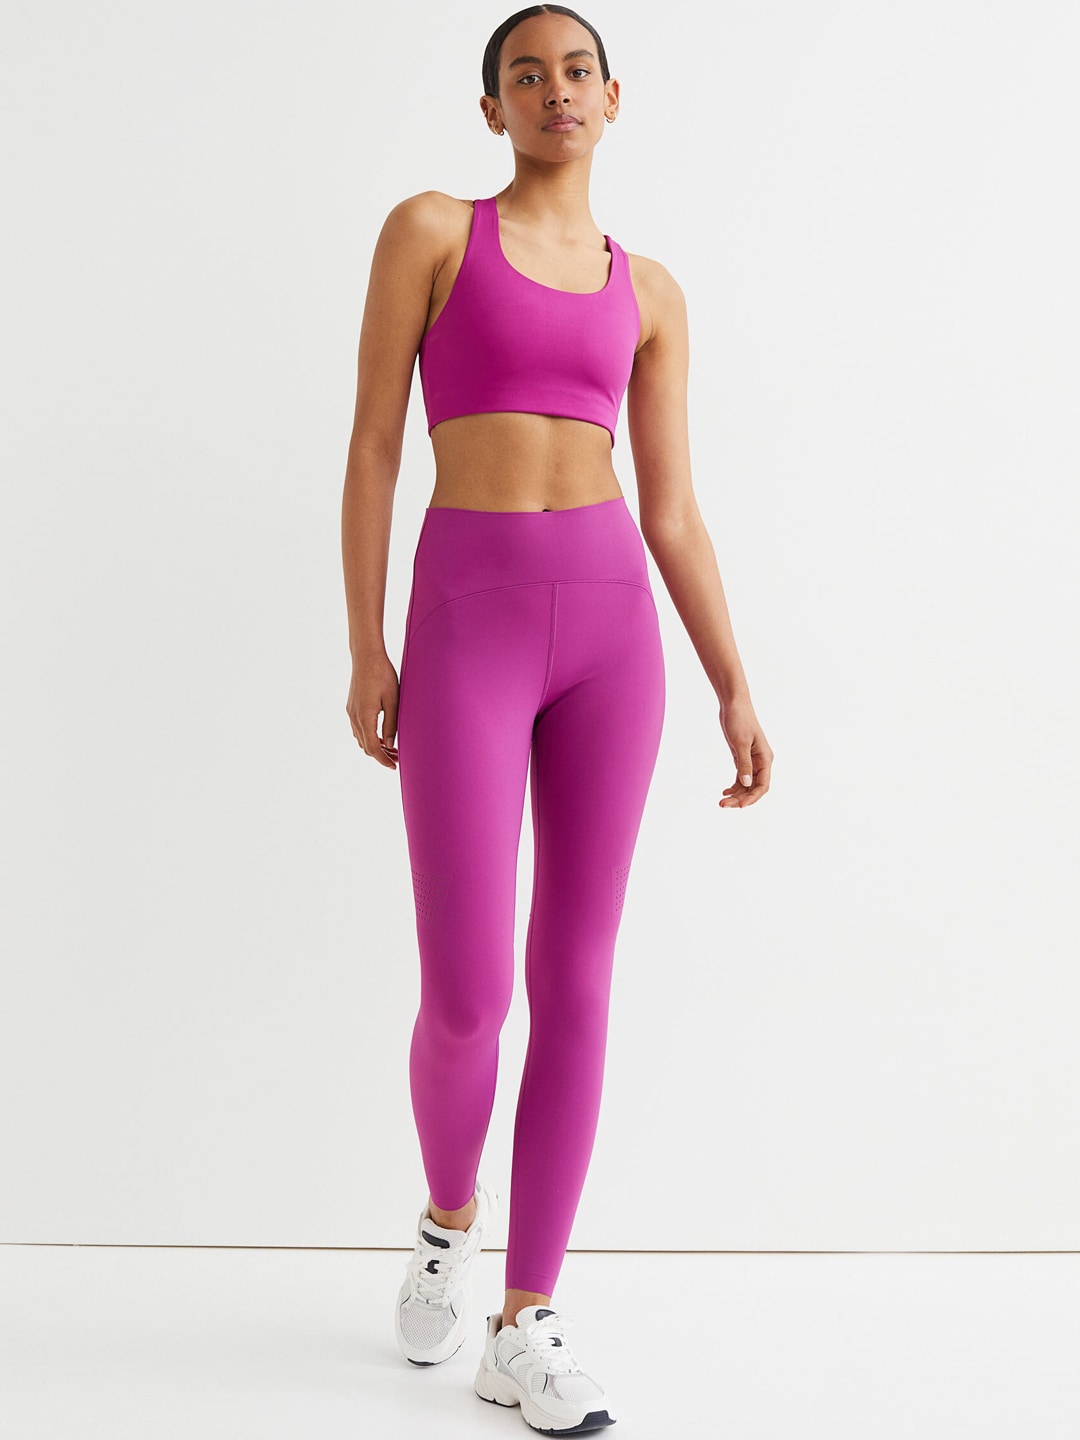 H&M Women Purple Solid High Waist Shaping Tights Price in India